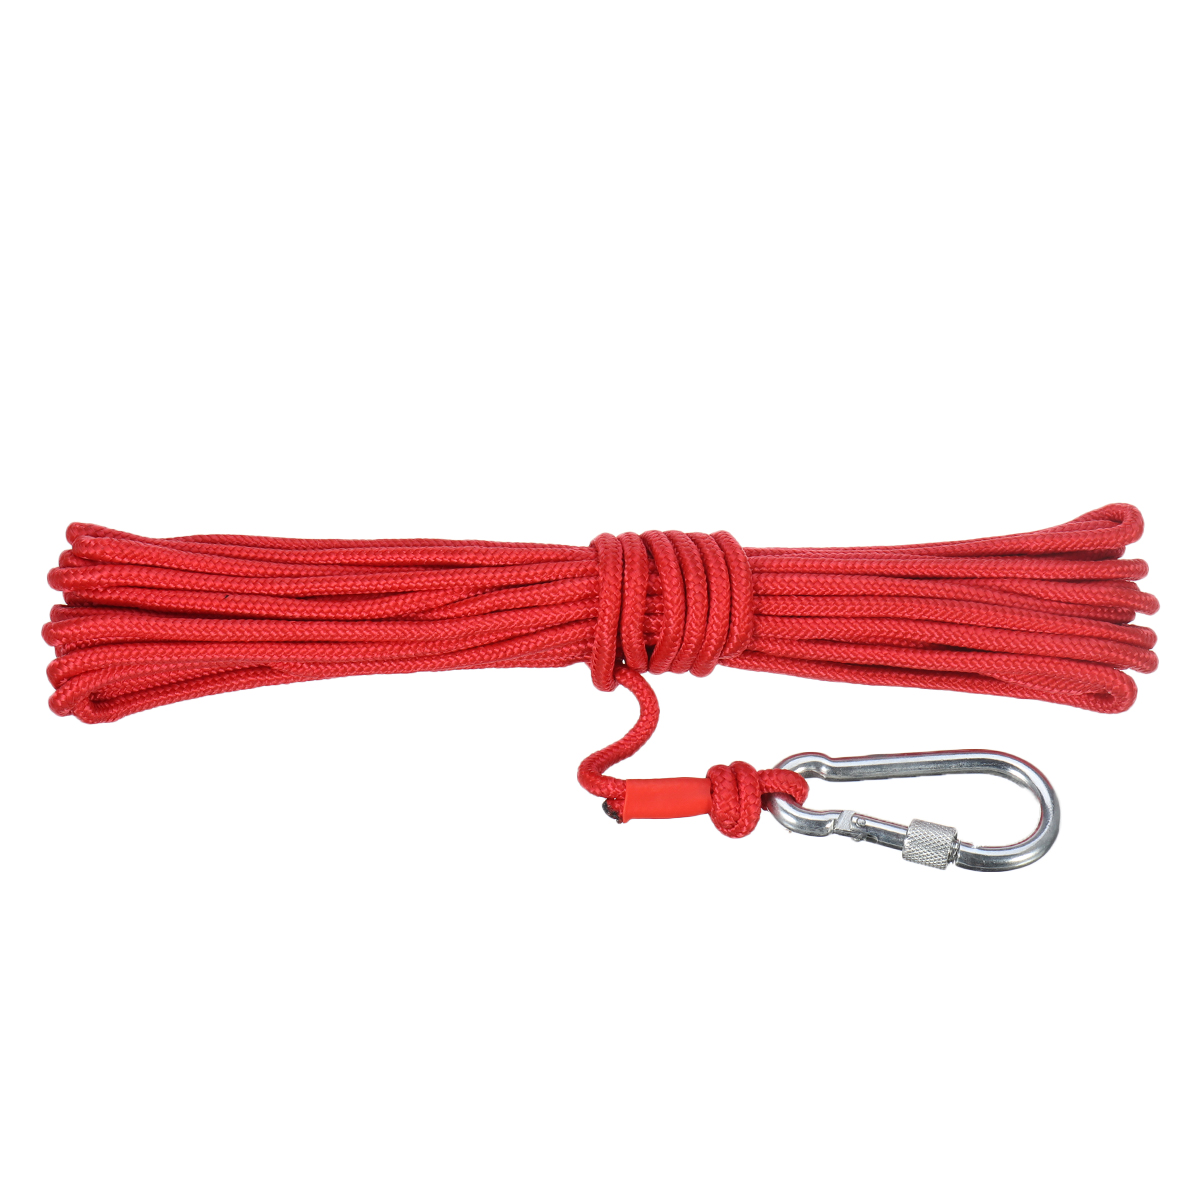 Find HNM48/60/67mm Double Side Strong Neodymium Fishing Magnet Set With 10m Rope And Gloves Fishing Tools for Sale on Gipsybee.com with cryptocurrencies